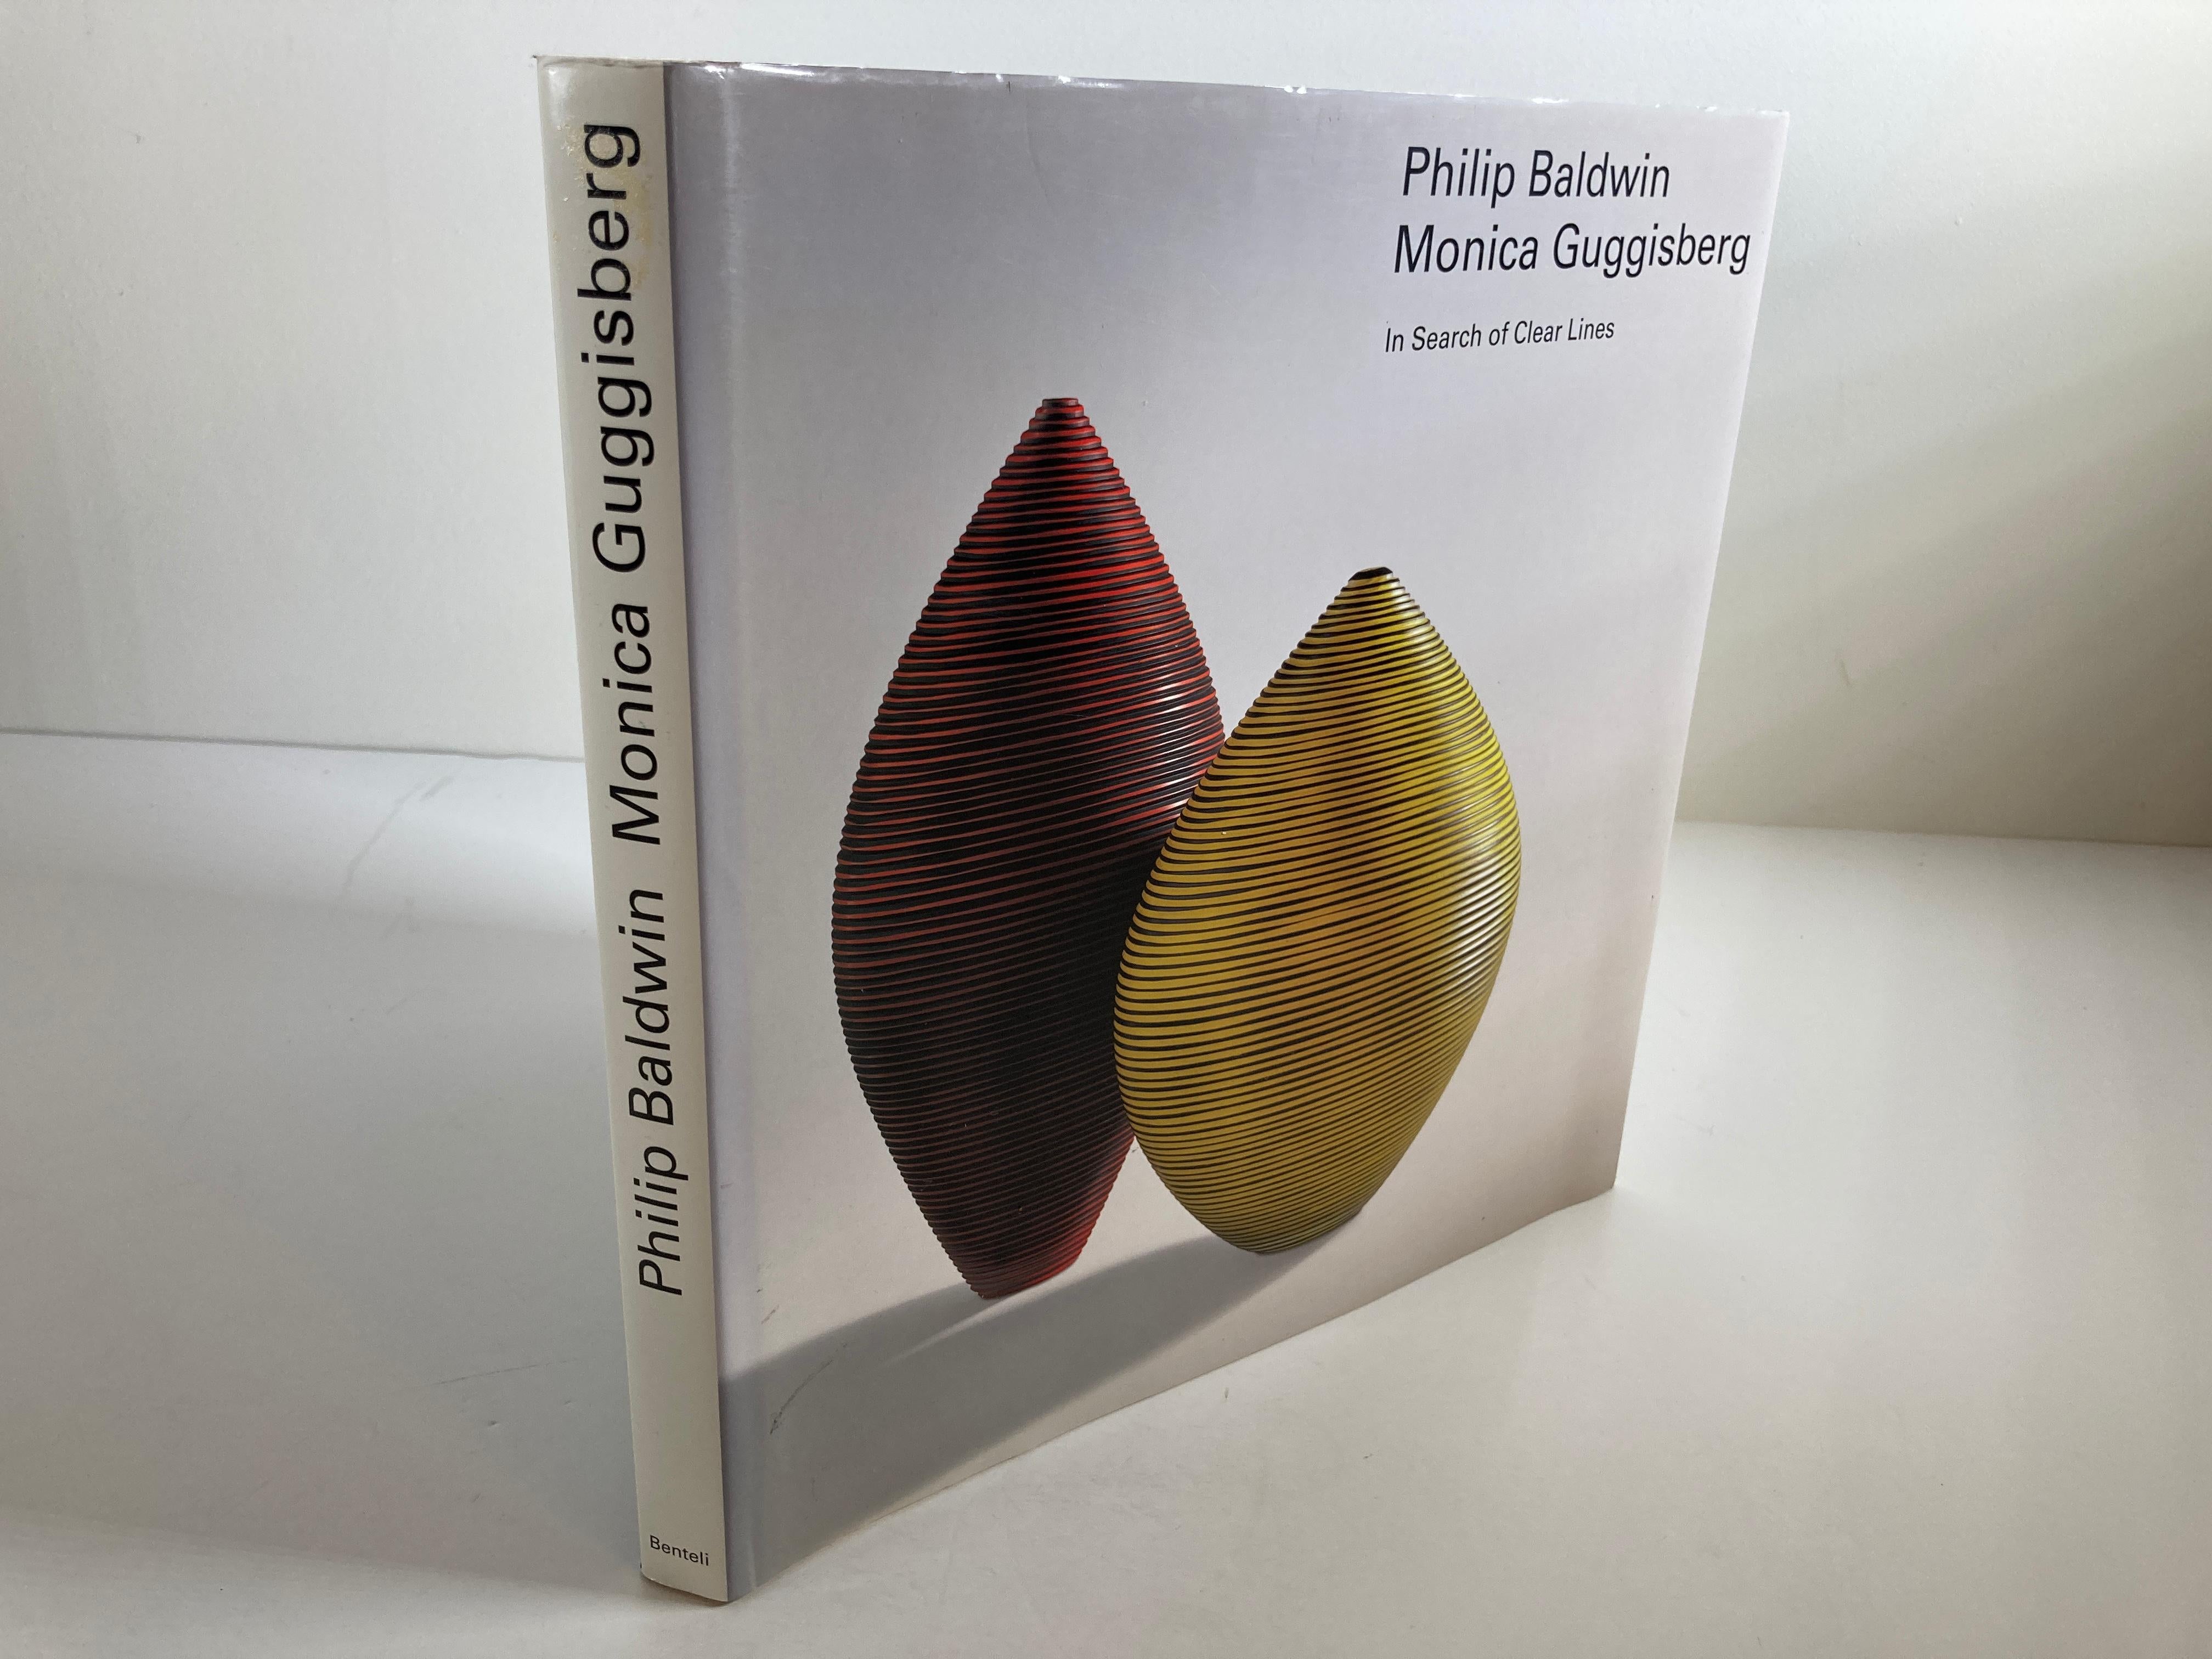 Philip Baldwin, Monica Guggisberg In Search Of Clear Lines, Buch im Zustand „Gut“ im Angebot in North Hollywood, CA